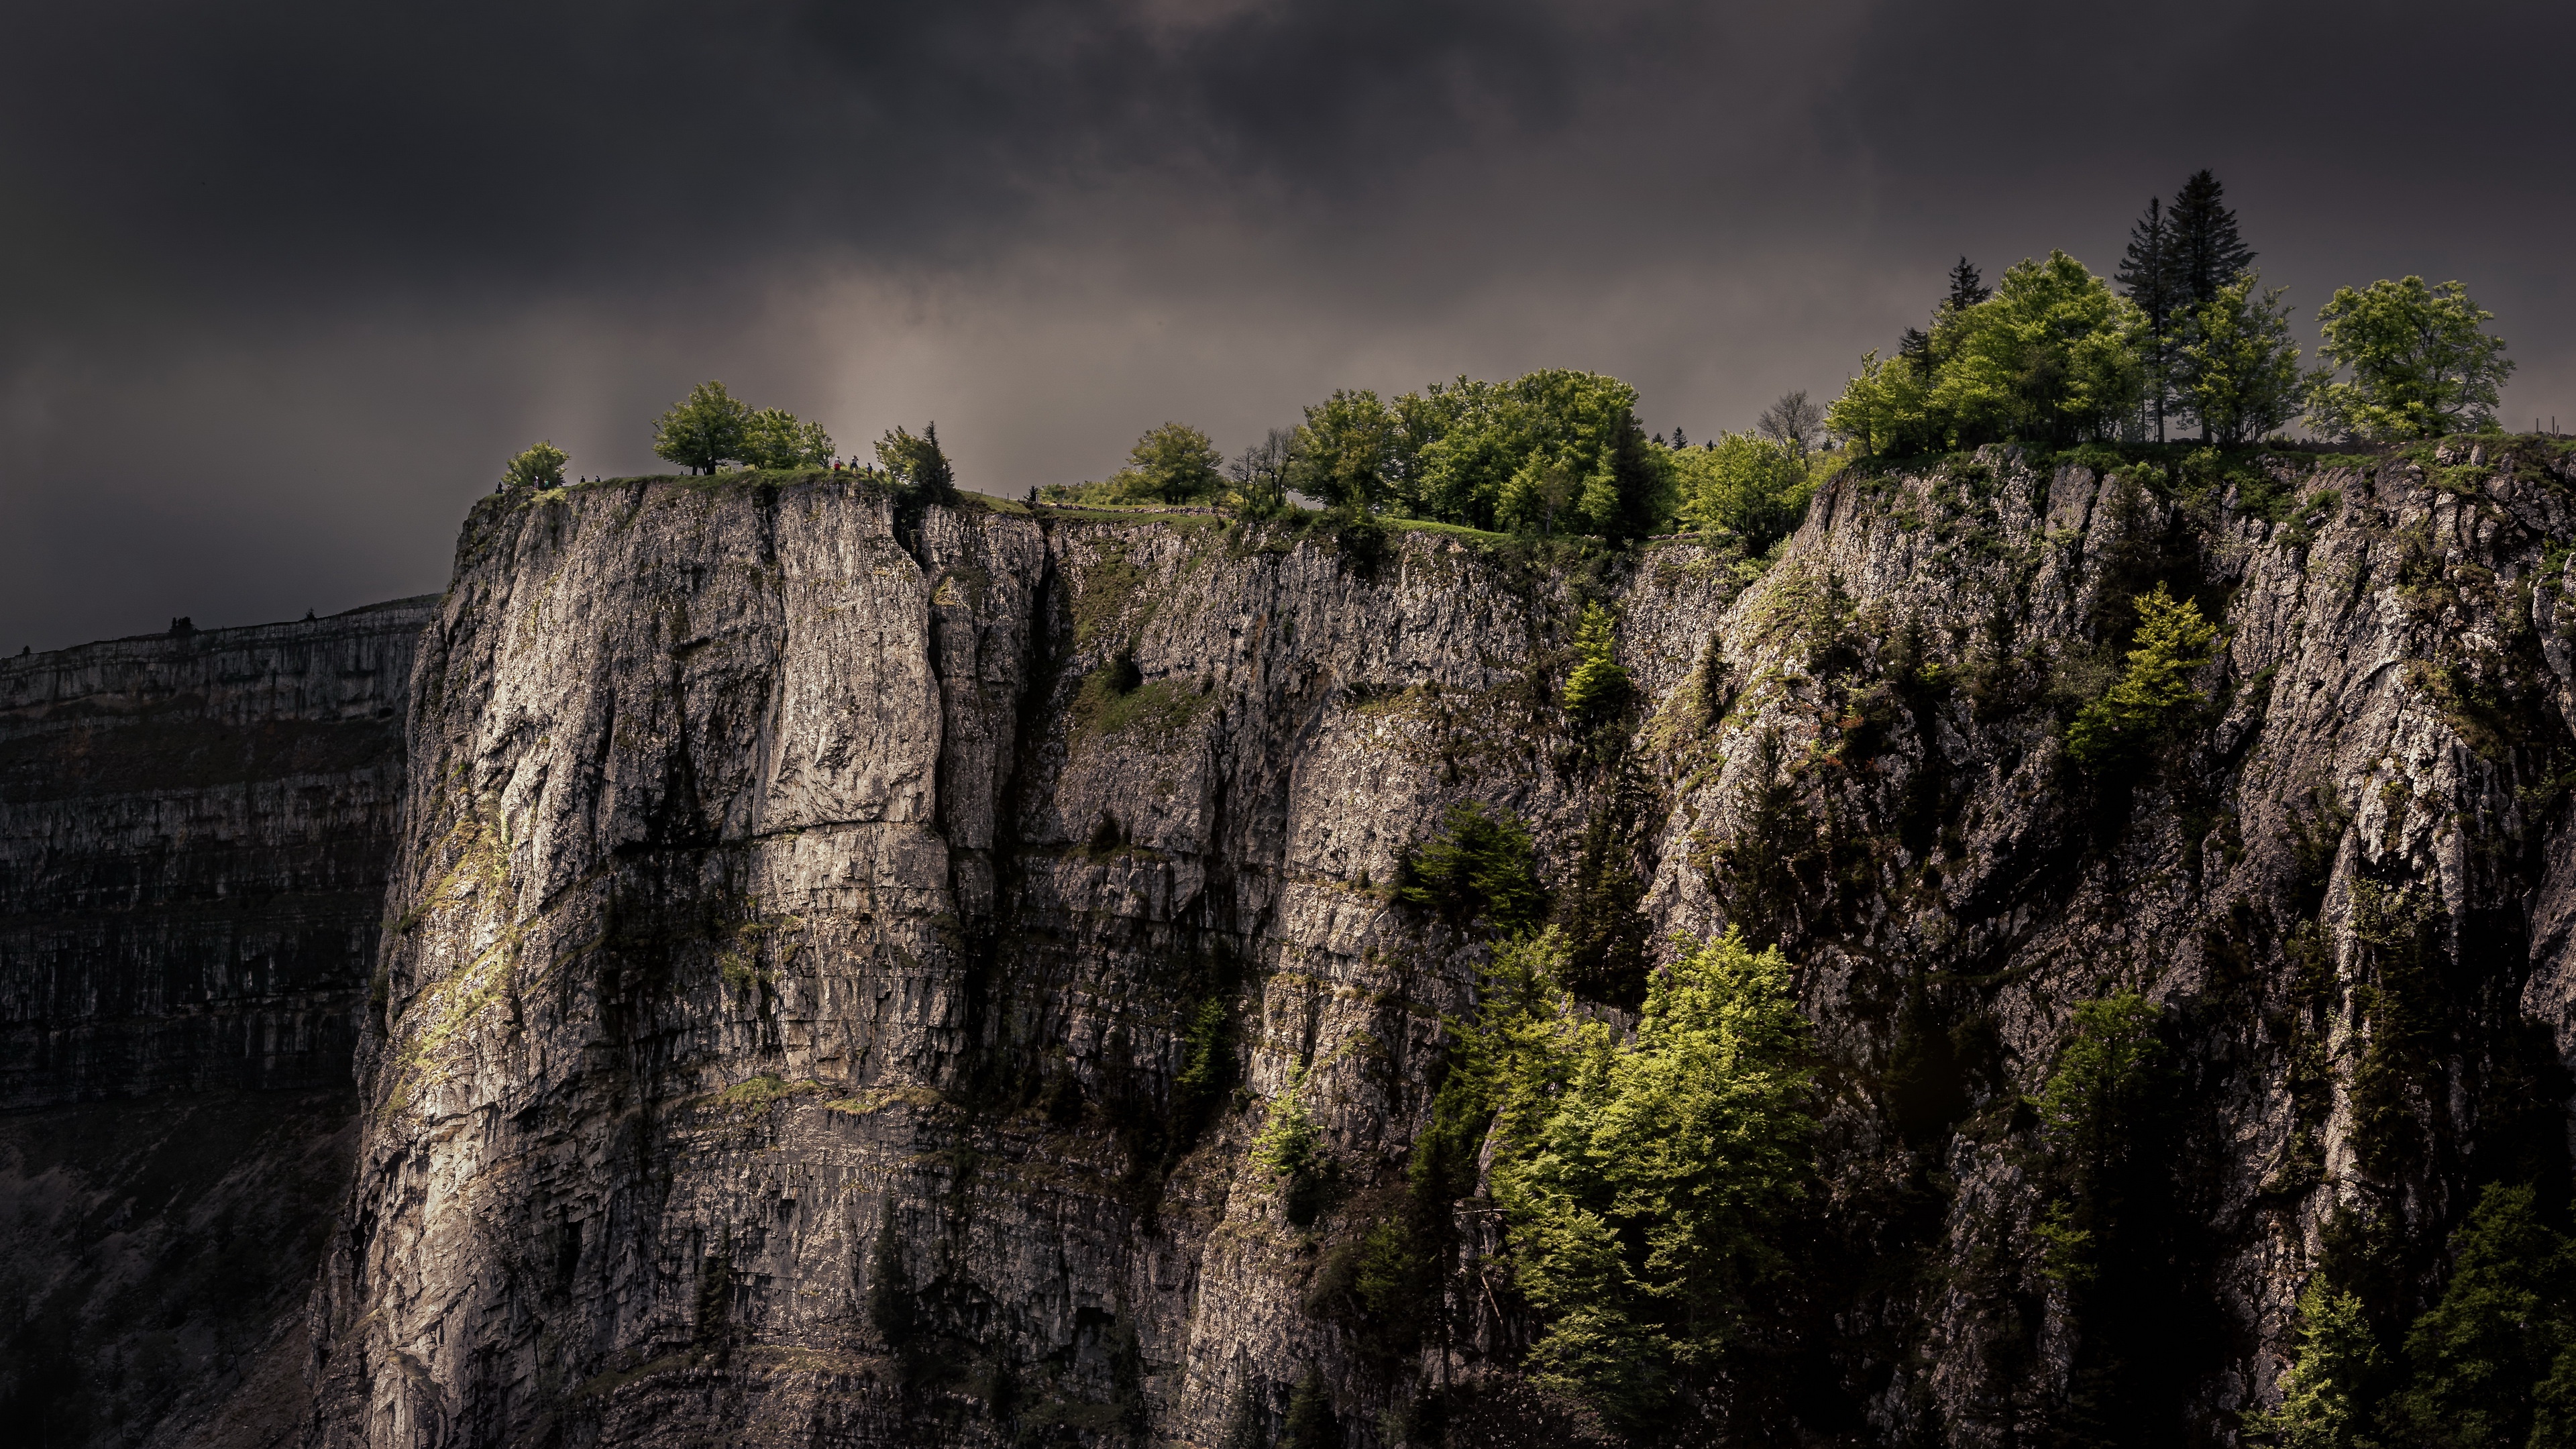 General 3840x2160 outdoors nature rocks cliff storm